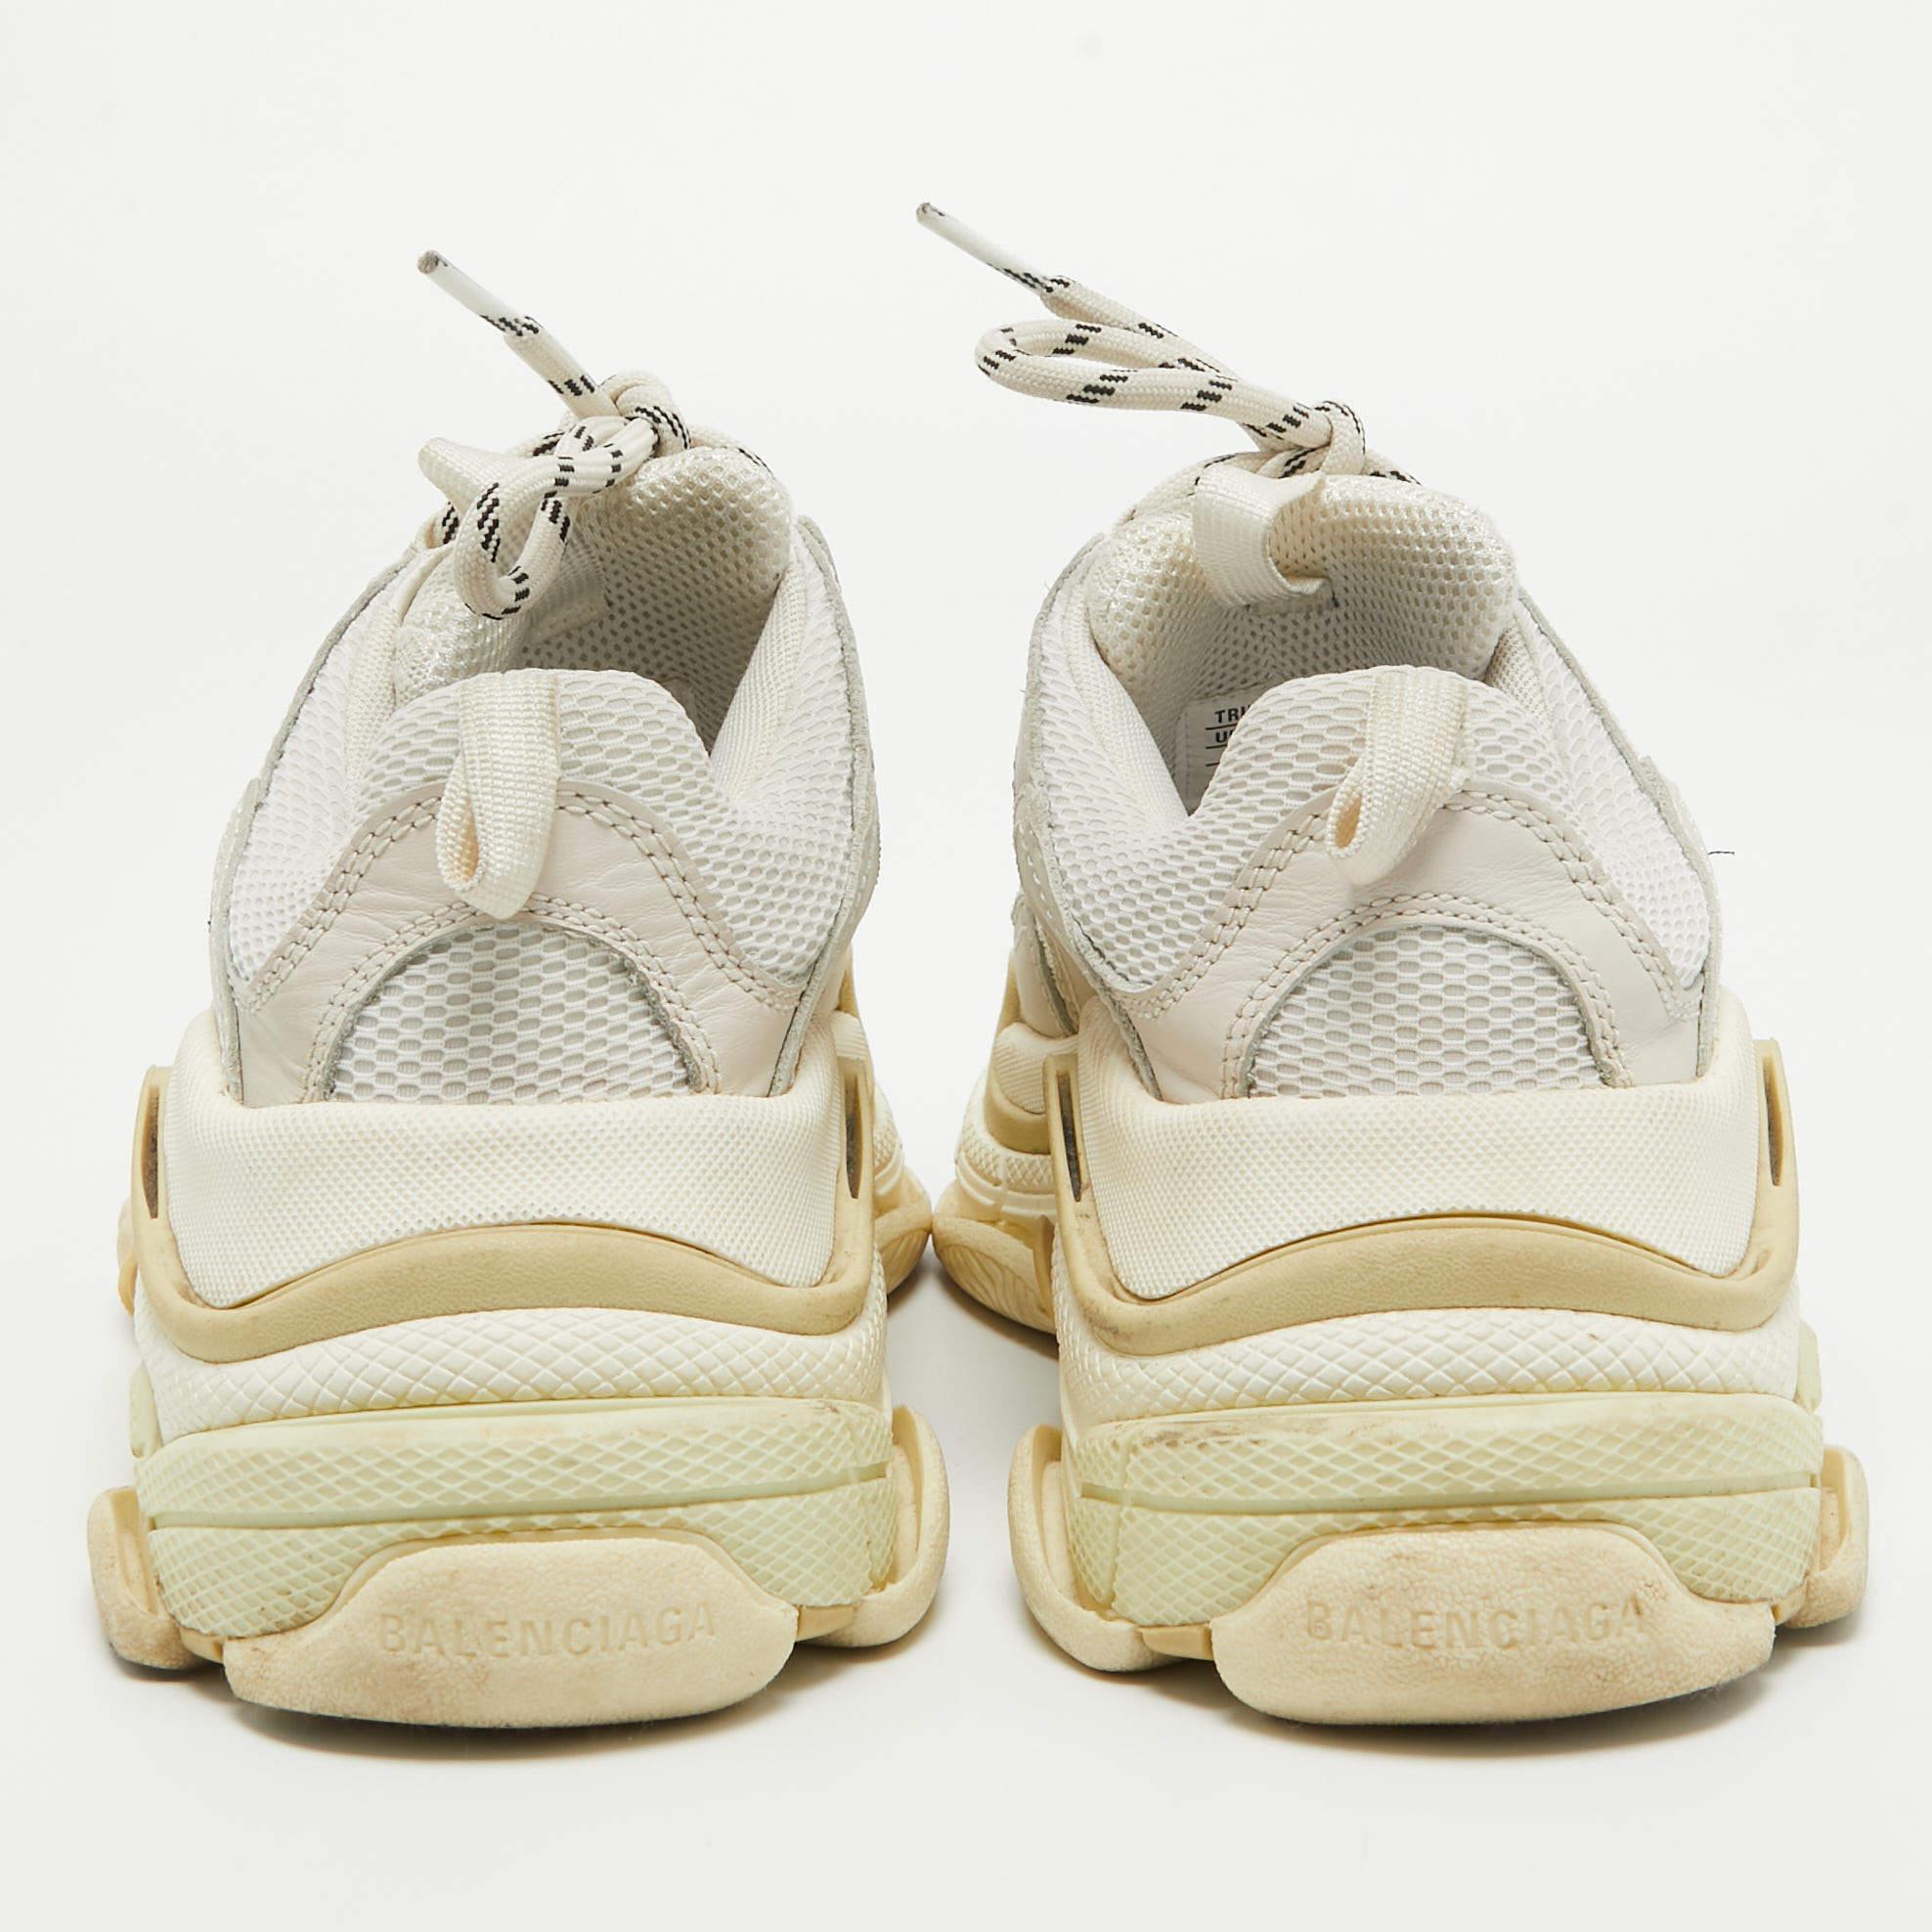 Balenciaga White/Grey Mesh and Leather Triple S Low Top Sneakers Size 37 For Sale 1